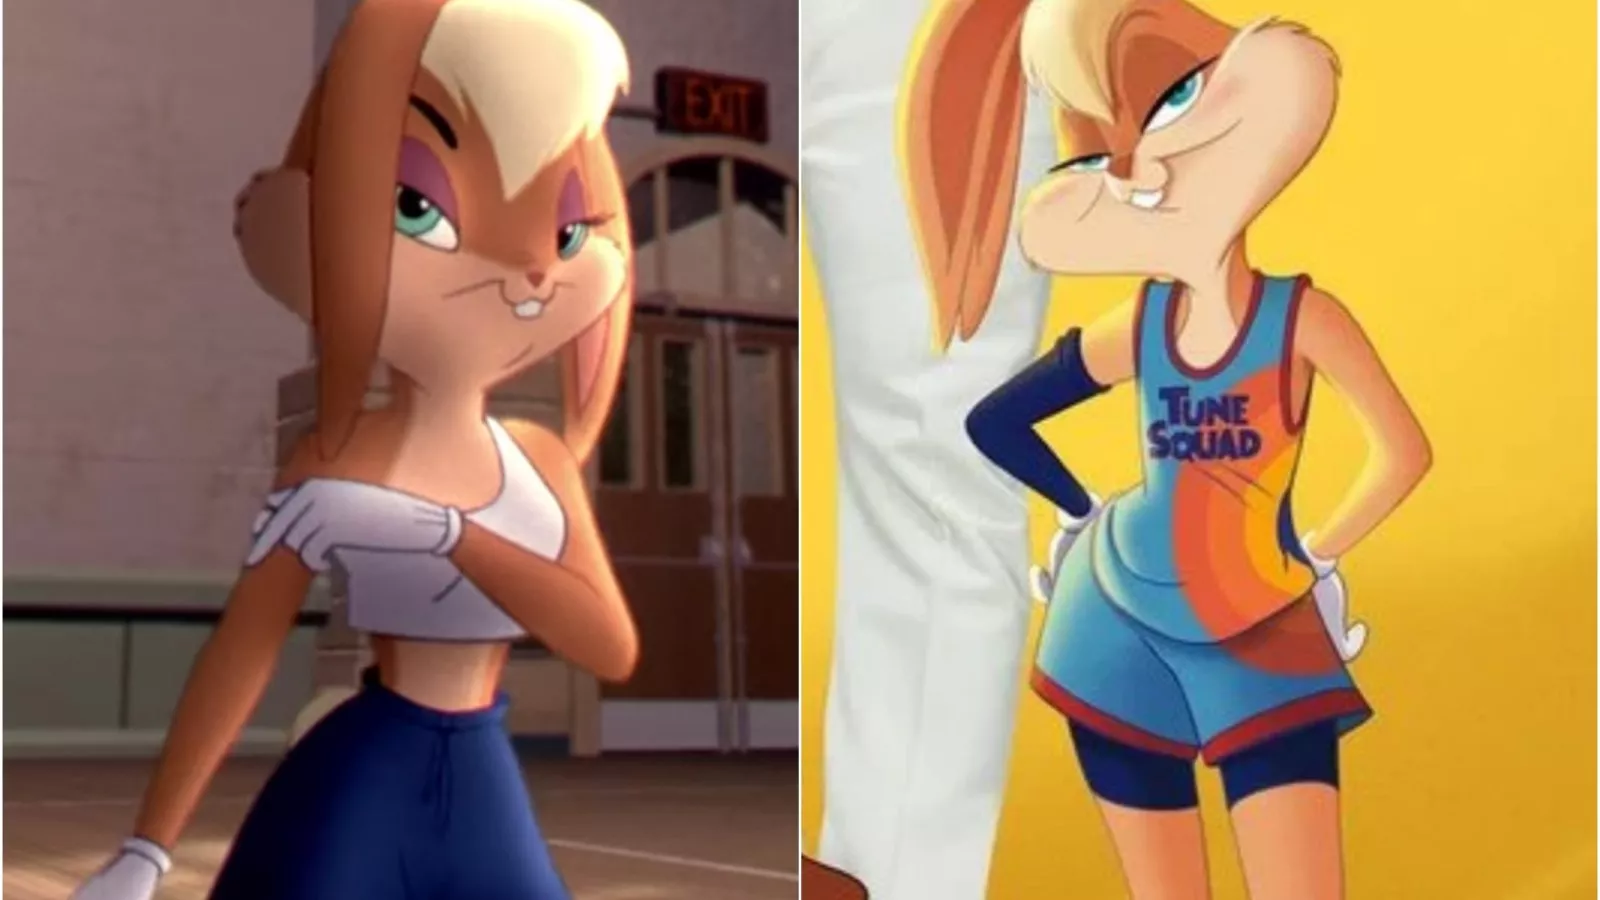 Space Jam 2's Lola Bunny, Pepé Le Pew: The sexy cartoon character won't be  sexy anymore in the new movie